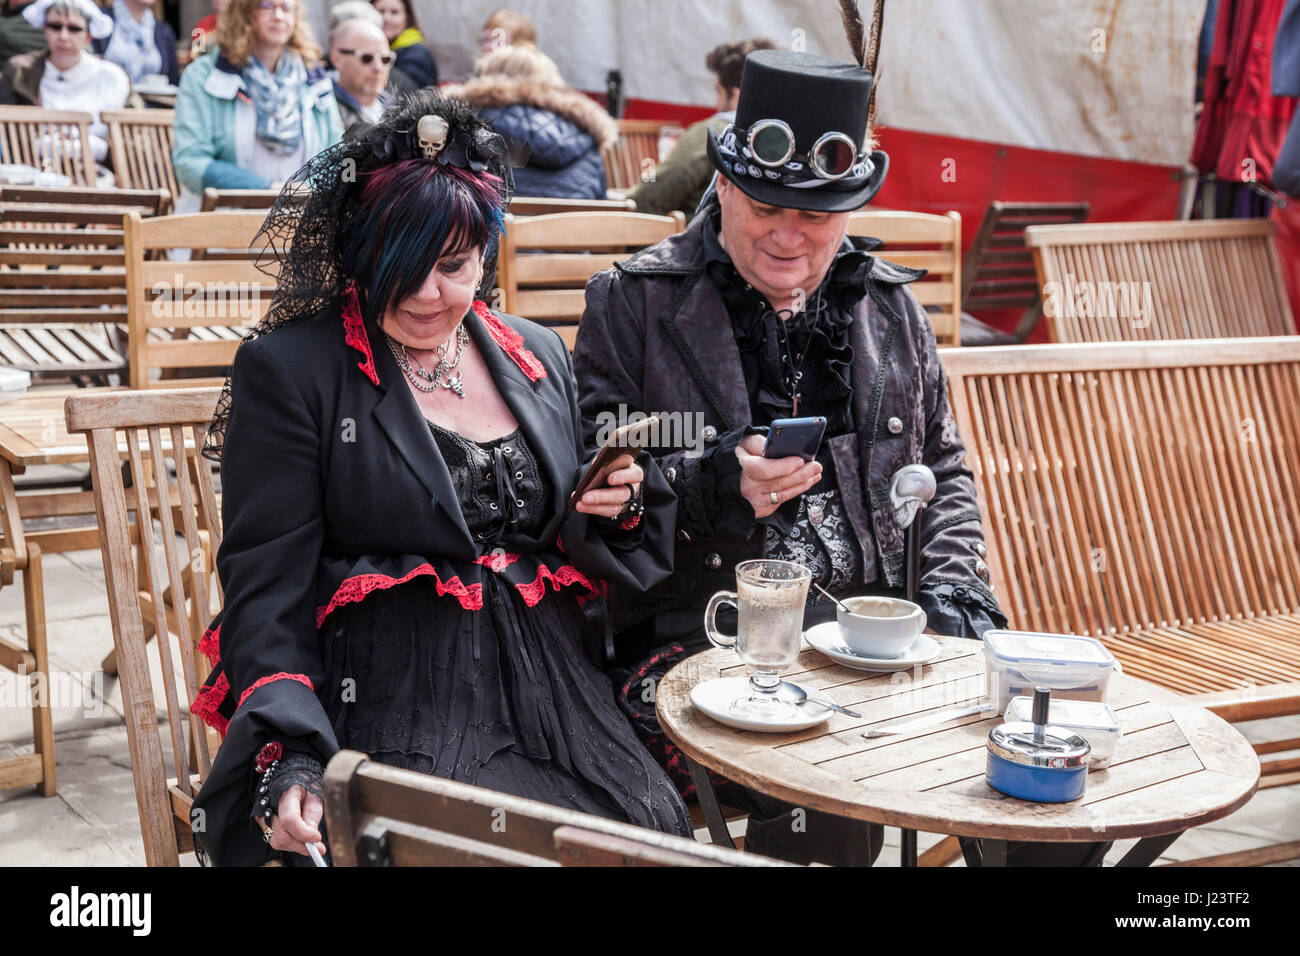 A man and woman dressed up for the Whitby Goth celebrations take a break and sit down for a drink and smoke and look at their phones Stock Photo